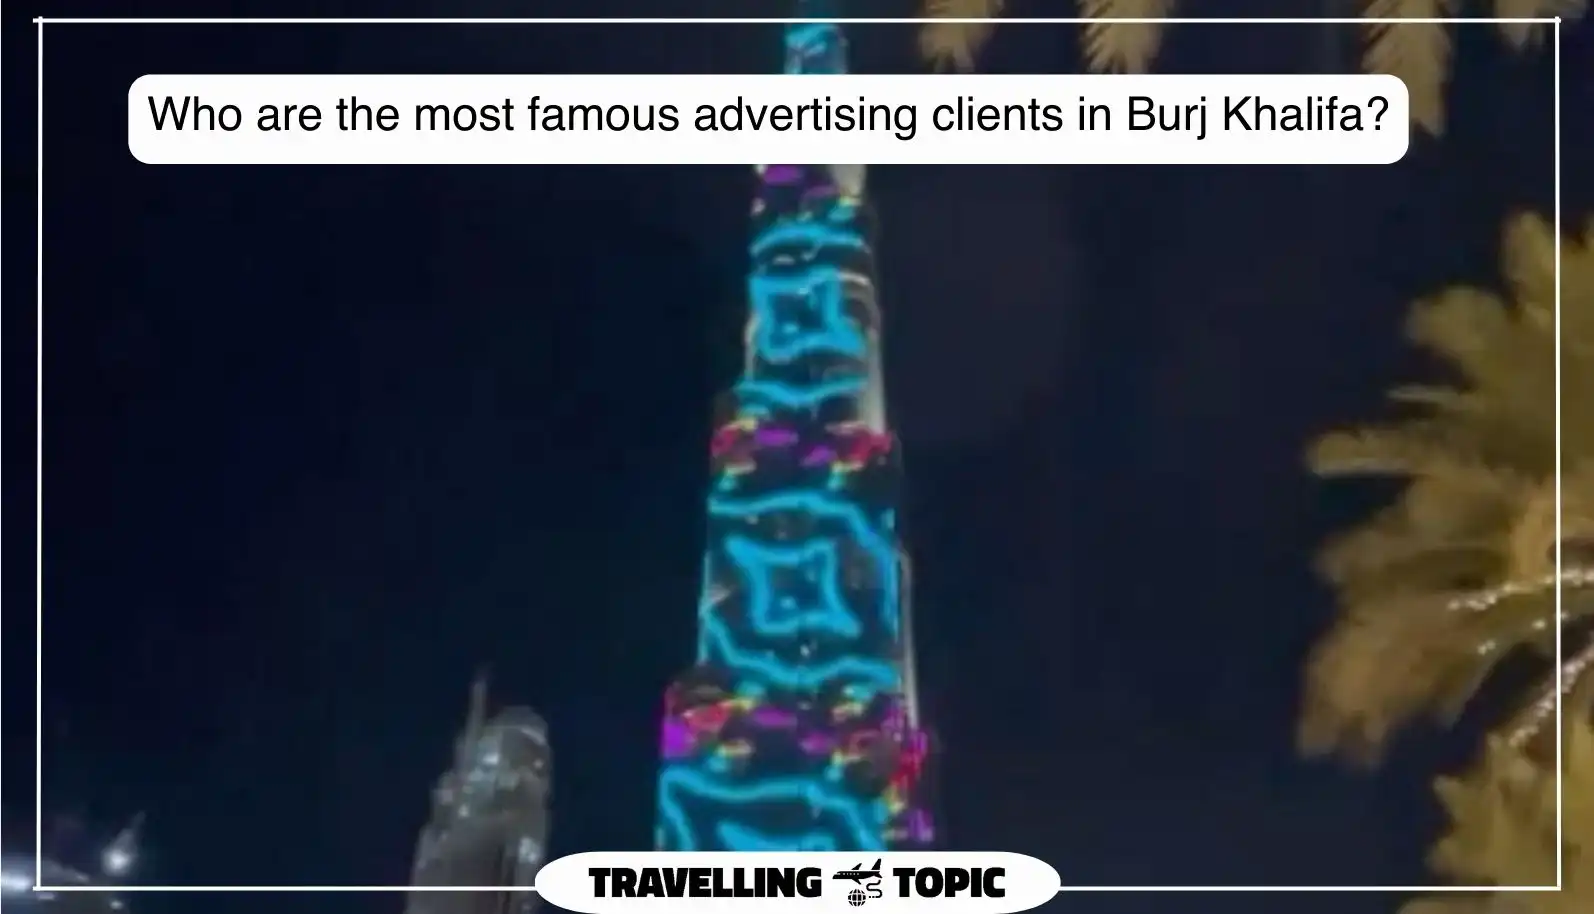 Who are the most famous advertising clients in Burj Khalifa